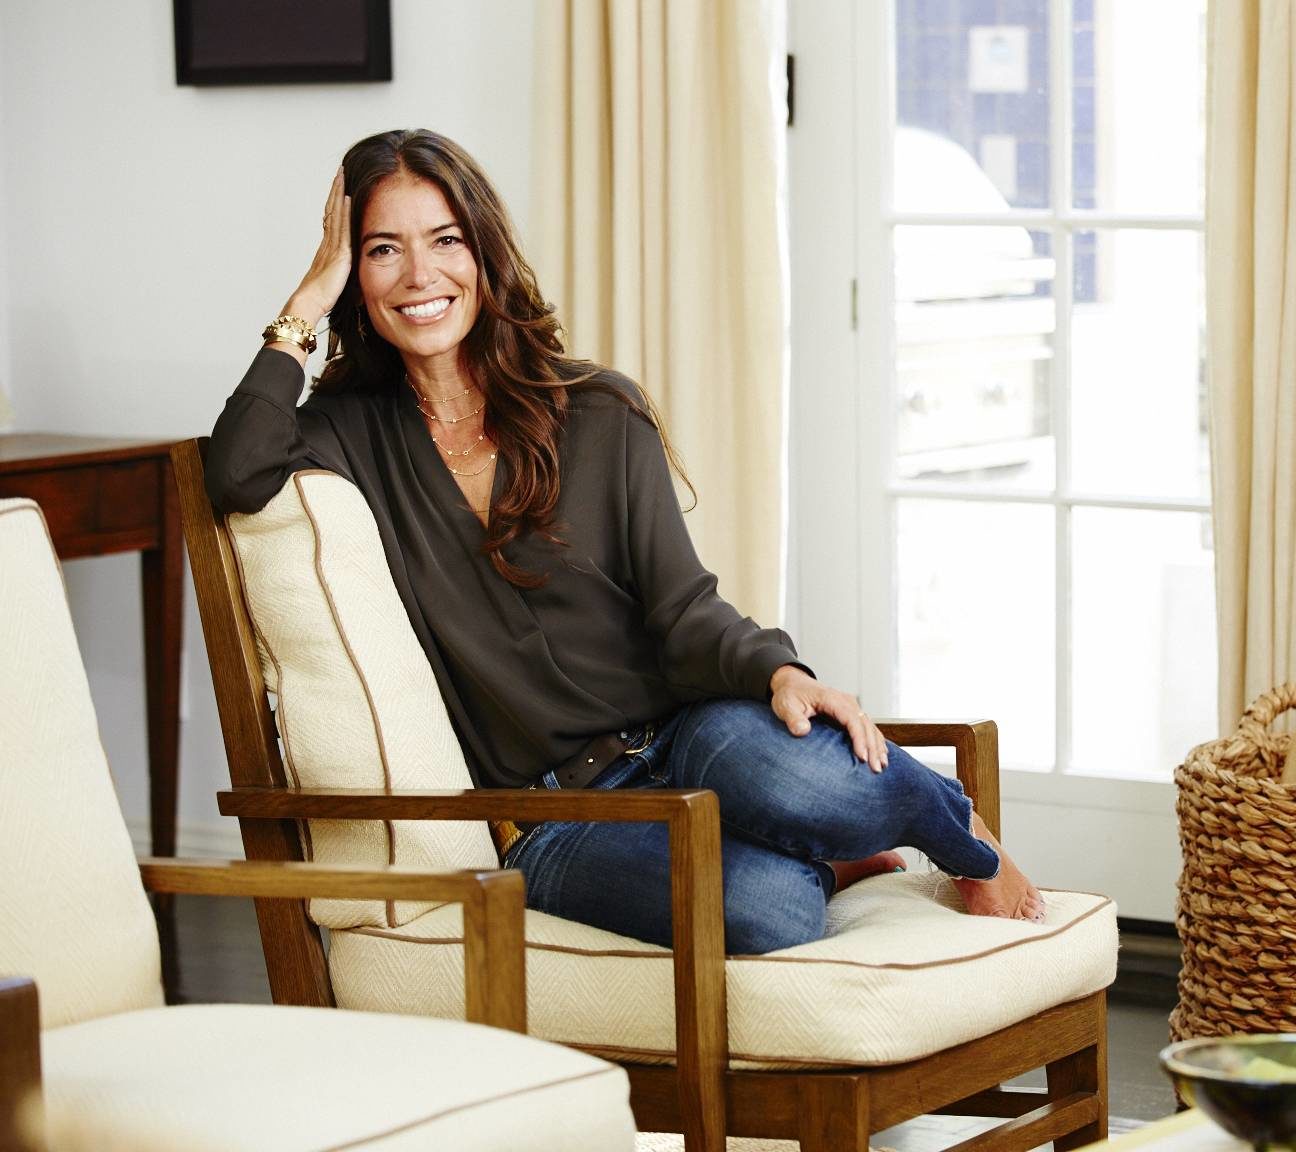 Laura Wasser, founder of It's Over Easy pictured sitting in a living room.